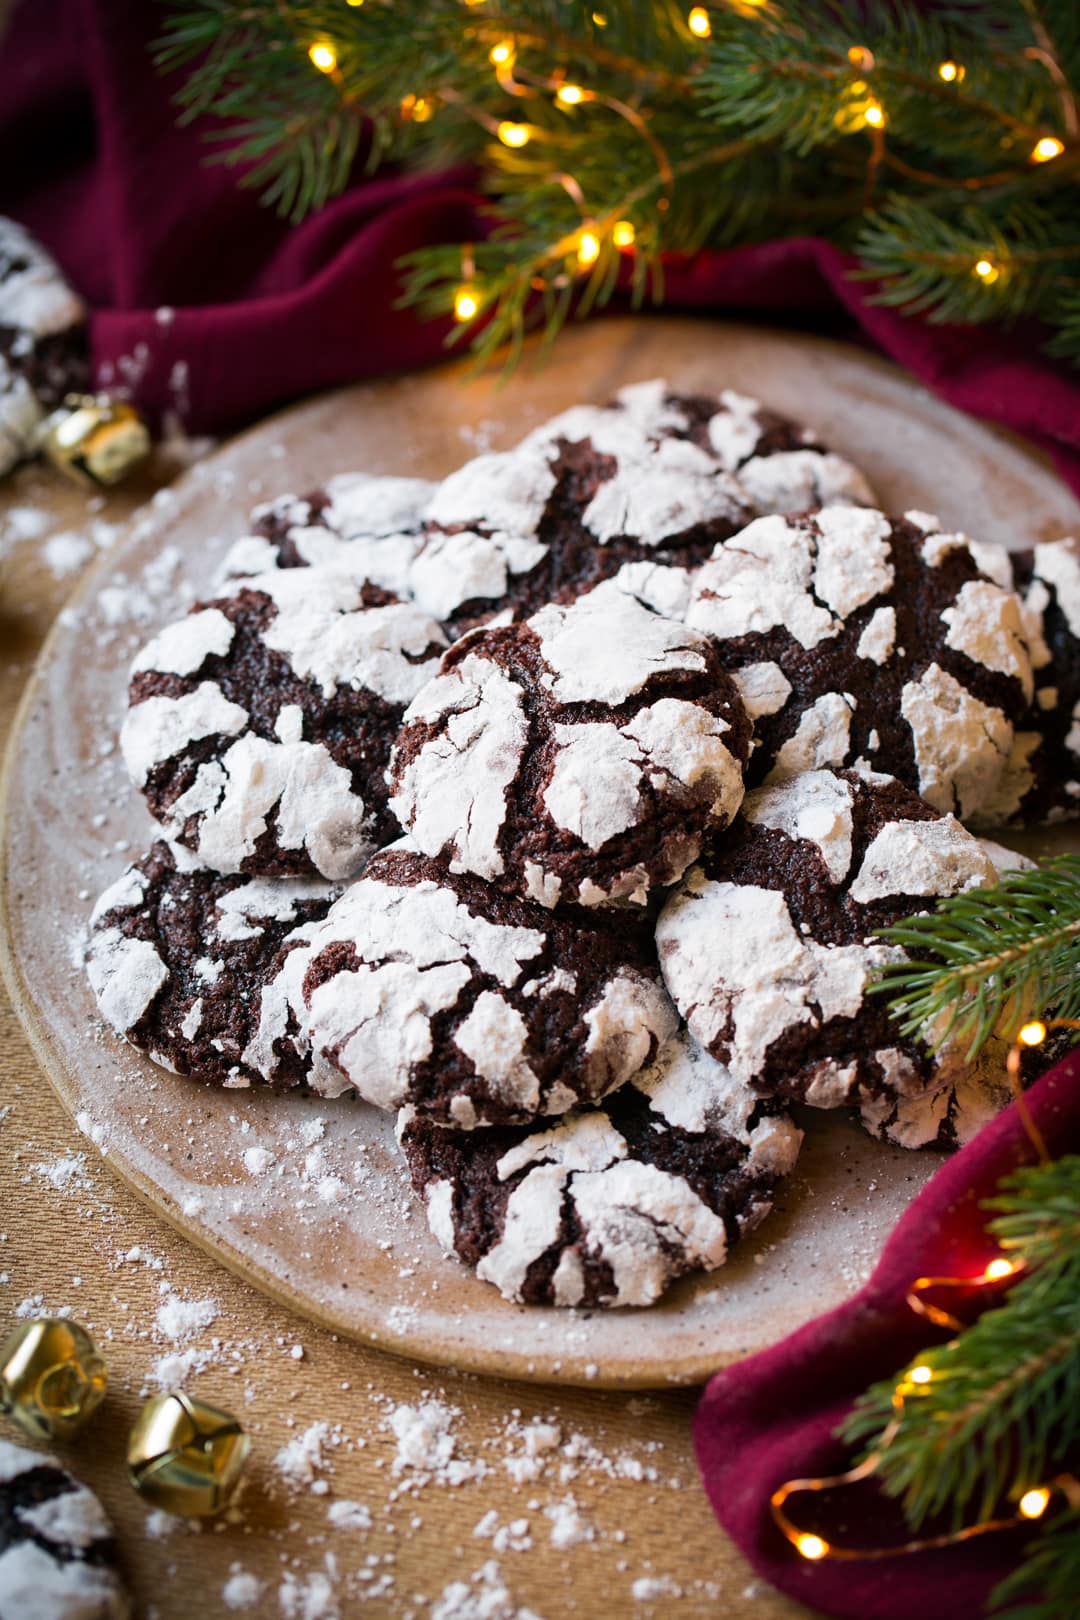 Chocolate Crinkle Cookies shown on a plate by a lit Christmas tree and red napkin.